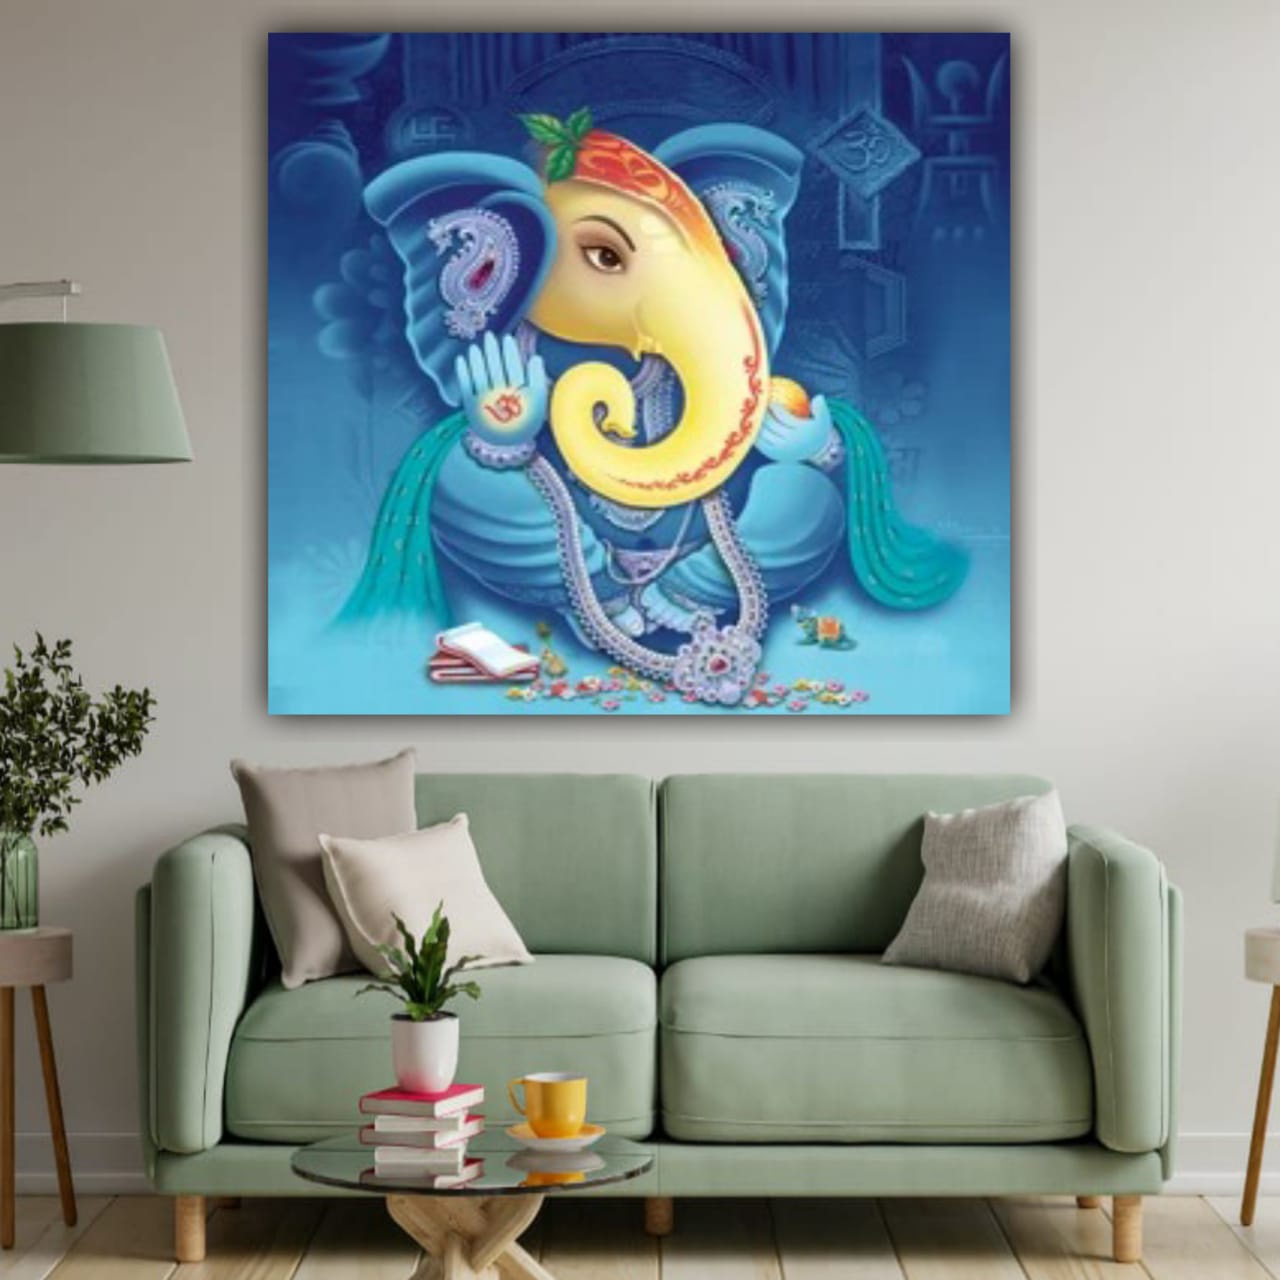 Auspicious Lord Ganesha Wall Painting Frame for Living Room Wall Decors